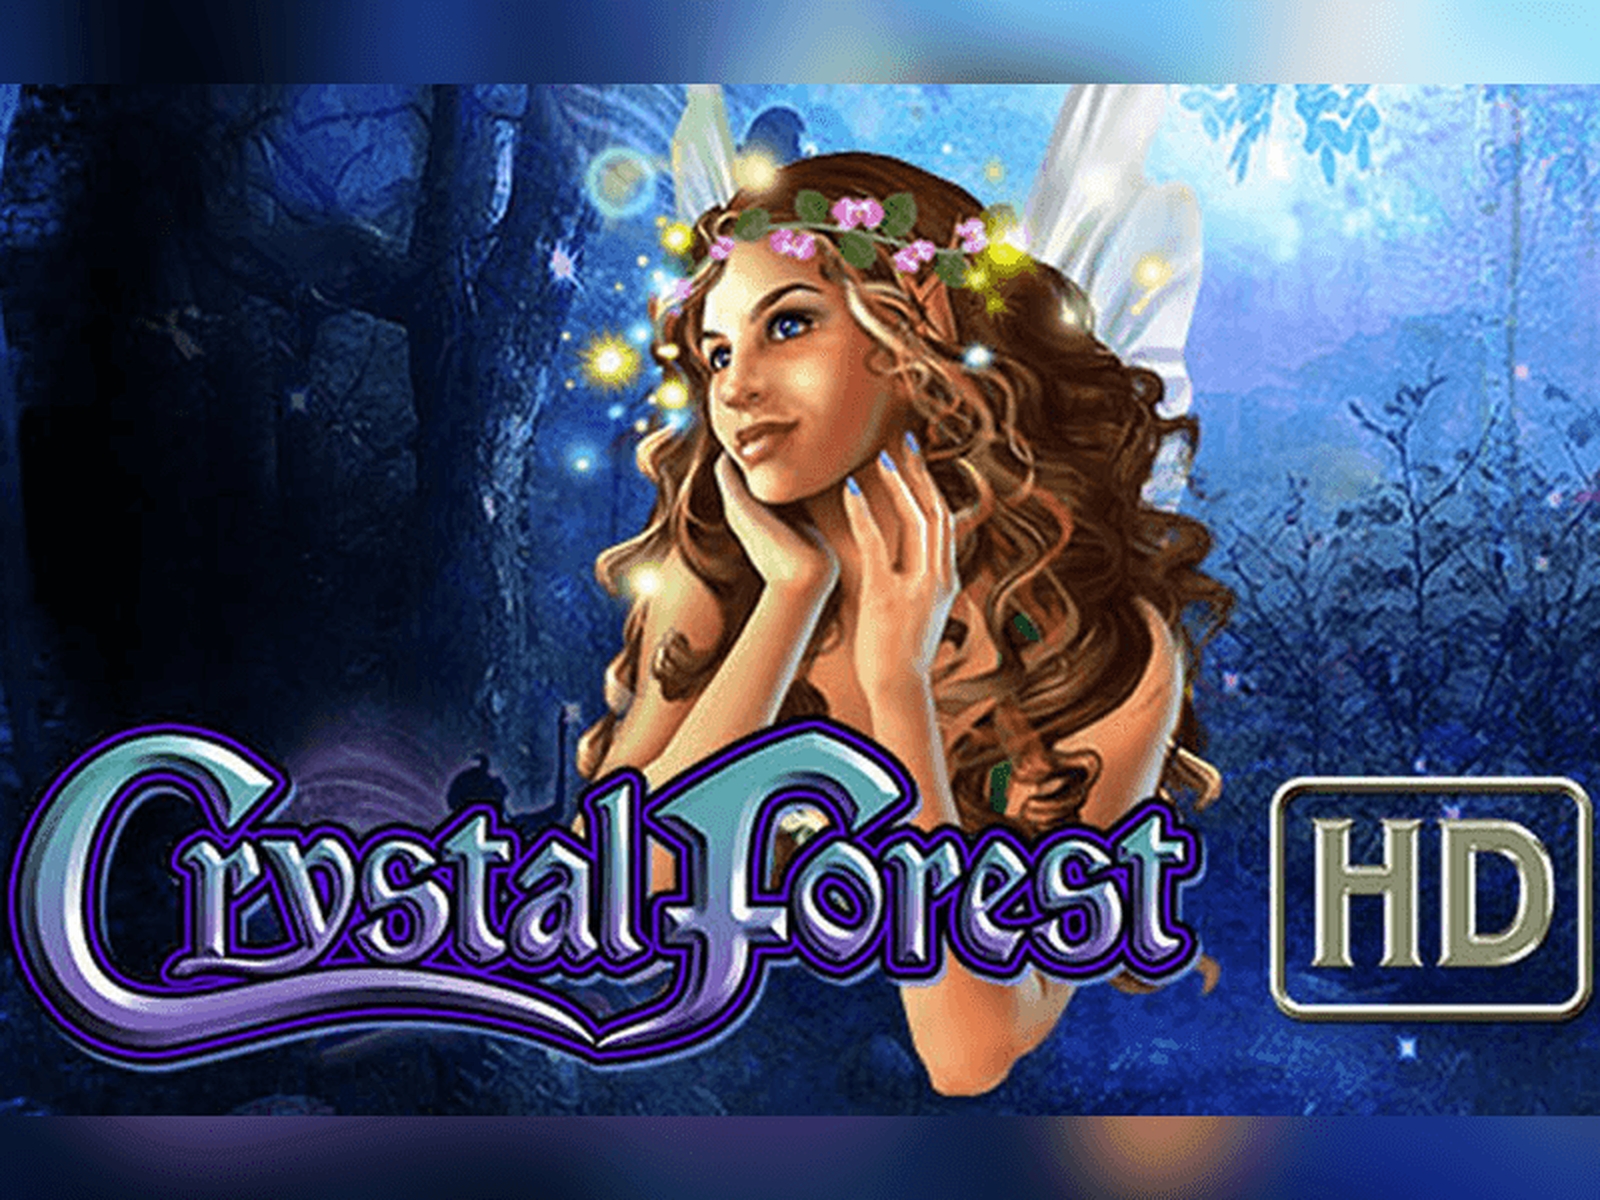 The Crystal Forest HD Online Slot Demo Game by WMS